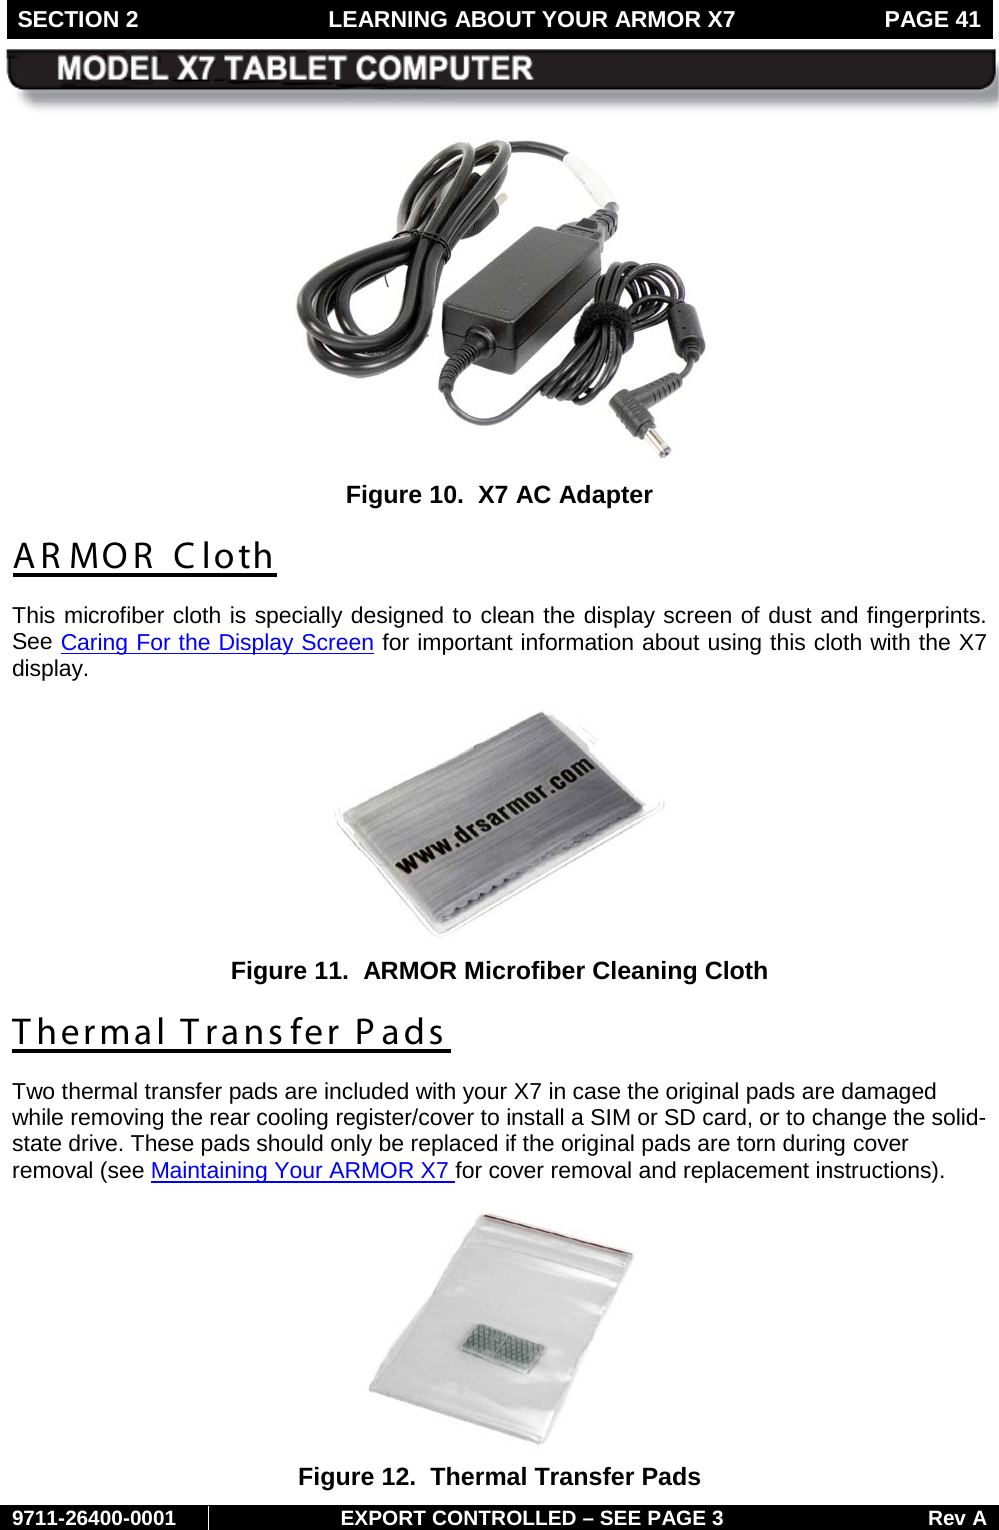 SECTION 2 LEARNING ABOUT YOUR ARMOR X7  PAGE 41        9711-26400-0001 EXPORT CONTROLLED – SEE PAGE 3 Rev A  Figure 10.  X7 AC Adapter AR MOR  C loth This microfiber cloth is specially designed to clean the display screen of dust and fingerprints. See Caring For the Display Screen for important information about using this cloth with the X7 display.   Figure 11.  ARMOR Microfiber Cleaning Cloth Thermal Transfer Pads Two thermal transfer pads are included with your X7 in case the original pads are damaged while removing the rear cooling register/cover to install a SIM or SD card, or to change the solid-state drive. These pads should only be replaced if the original pads are torn during cover removal (see Maintaining Your ARMOR X7 for cover removal and replacement instructions).    Figure 12.  Thermal Transfer Pads  